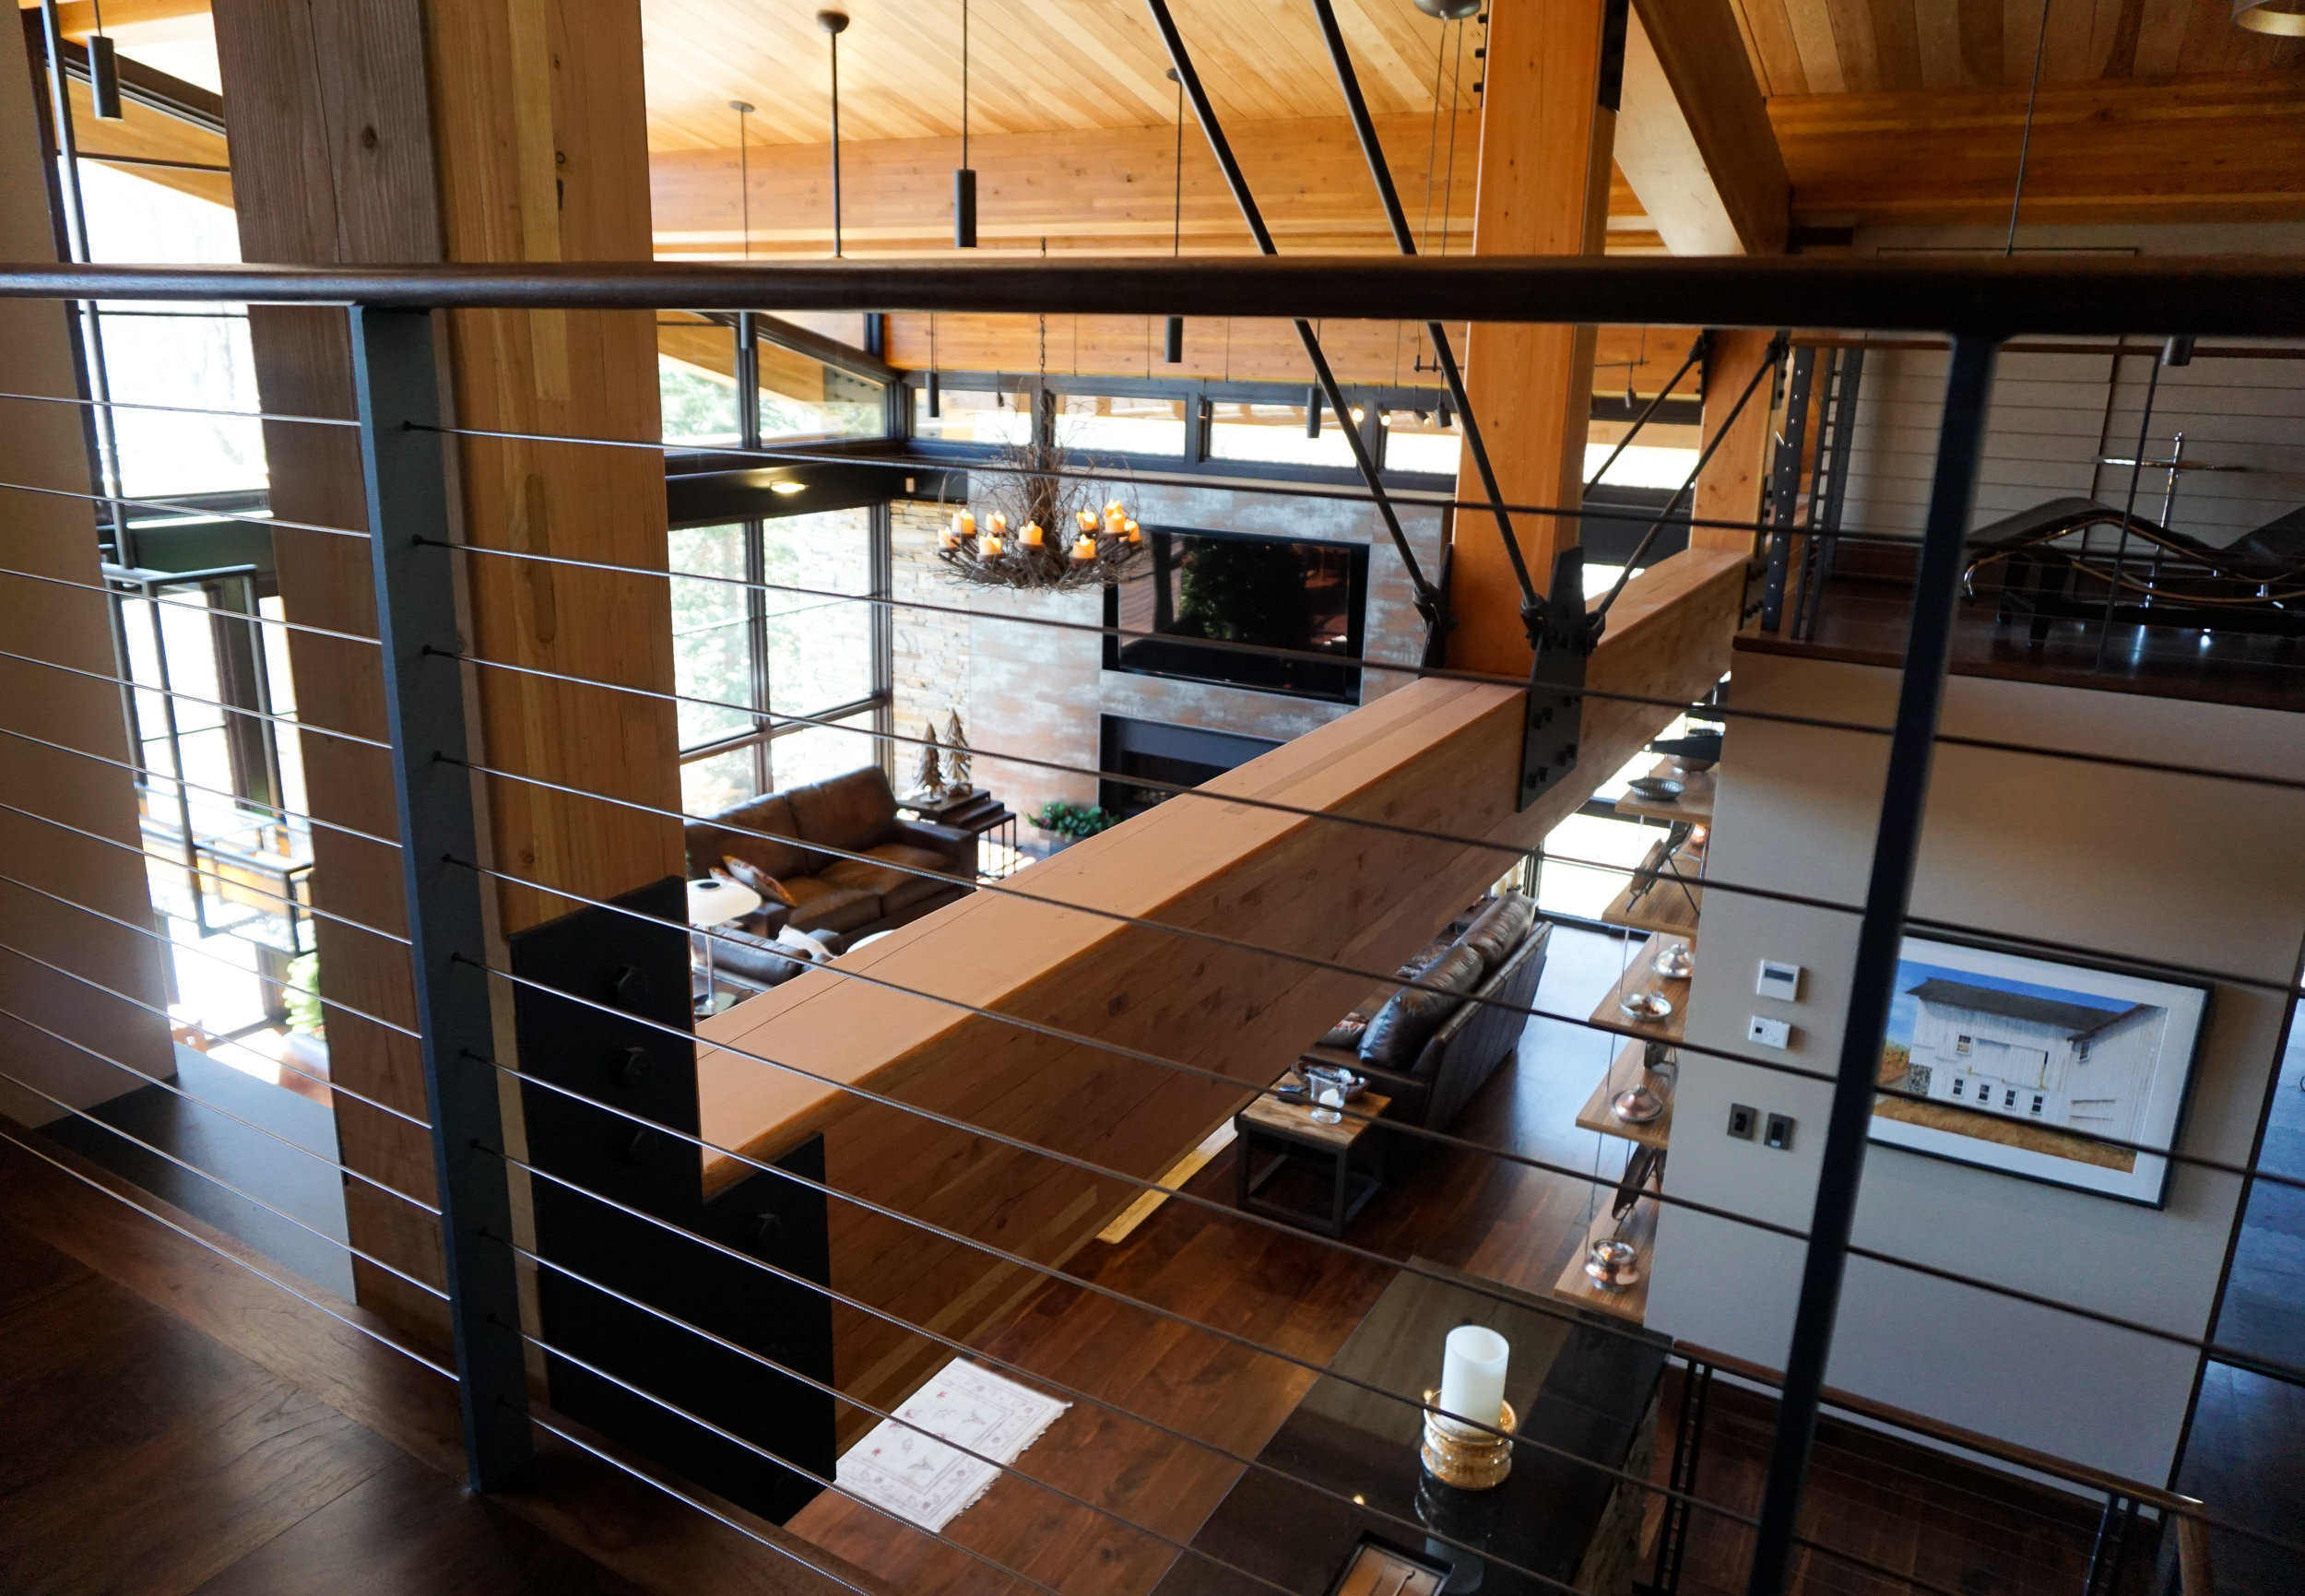 Exposed beam architecture and modern cable railing system